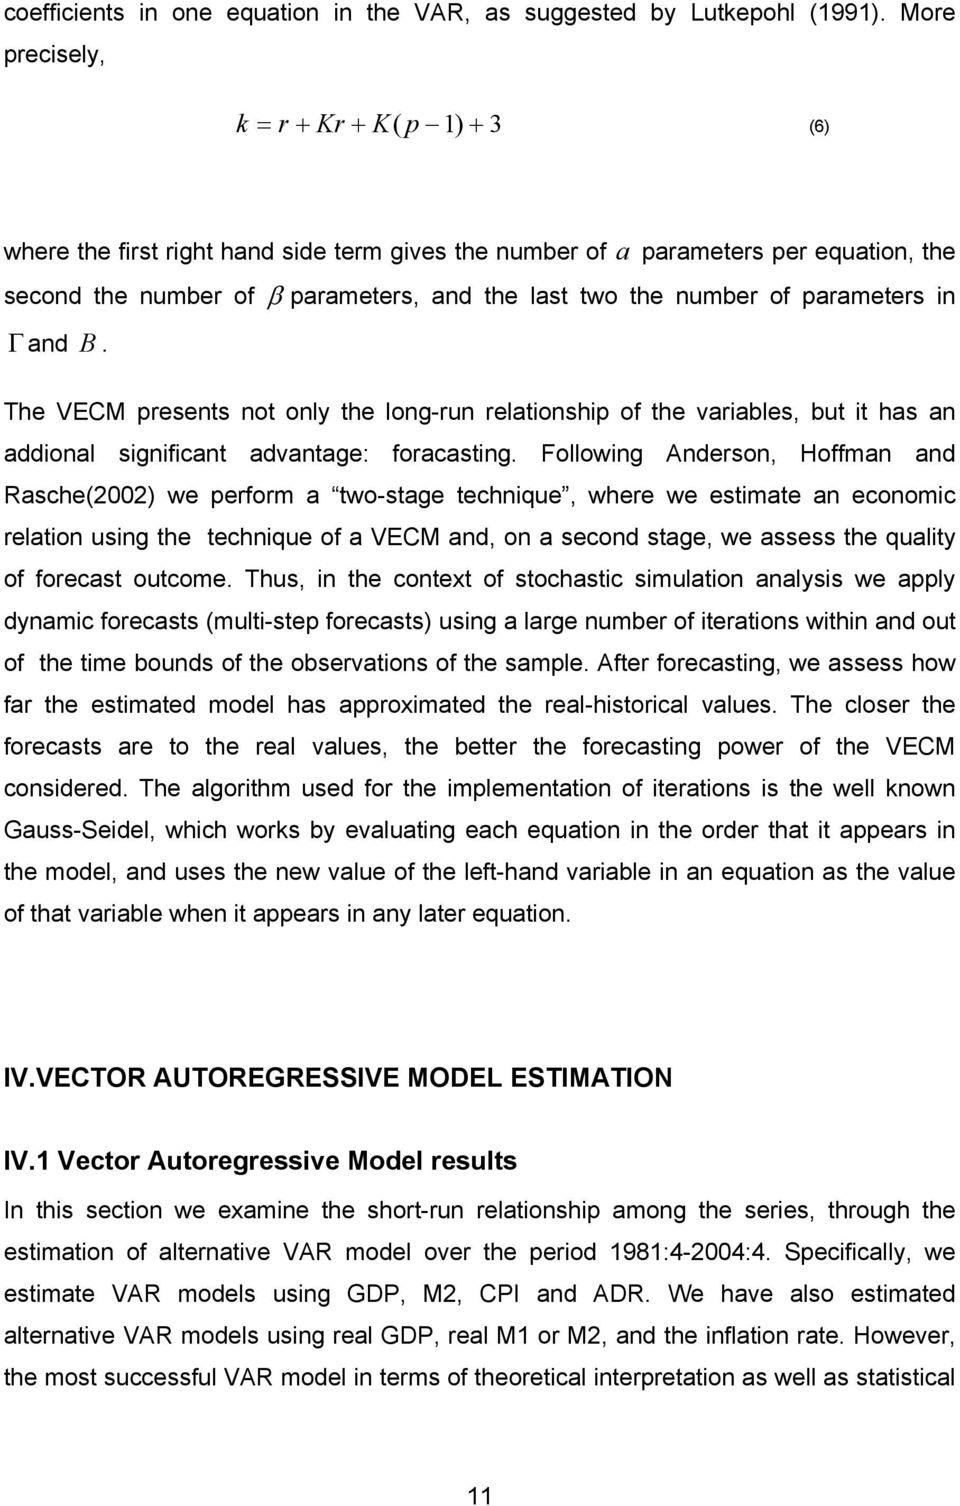 parameters in Γ and B. The VECM presents not only the long-run relationship of the variables, but it has an addional significant advantage: foracasting.